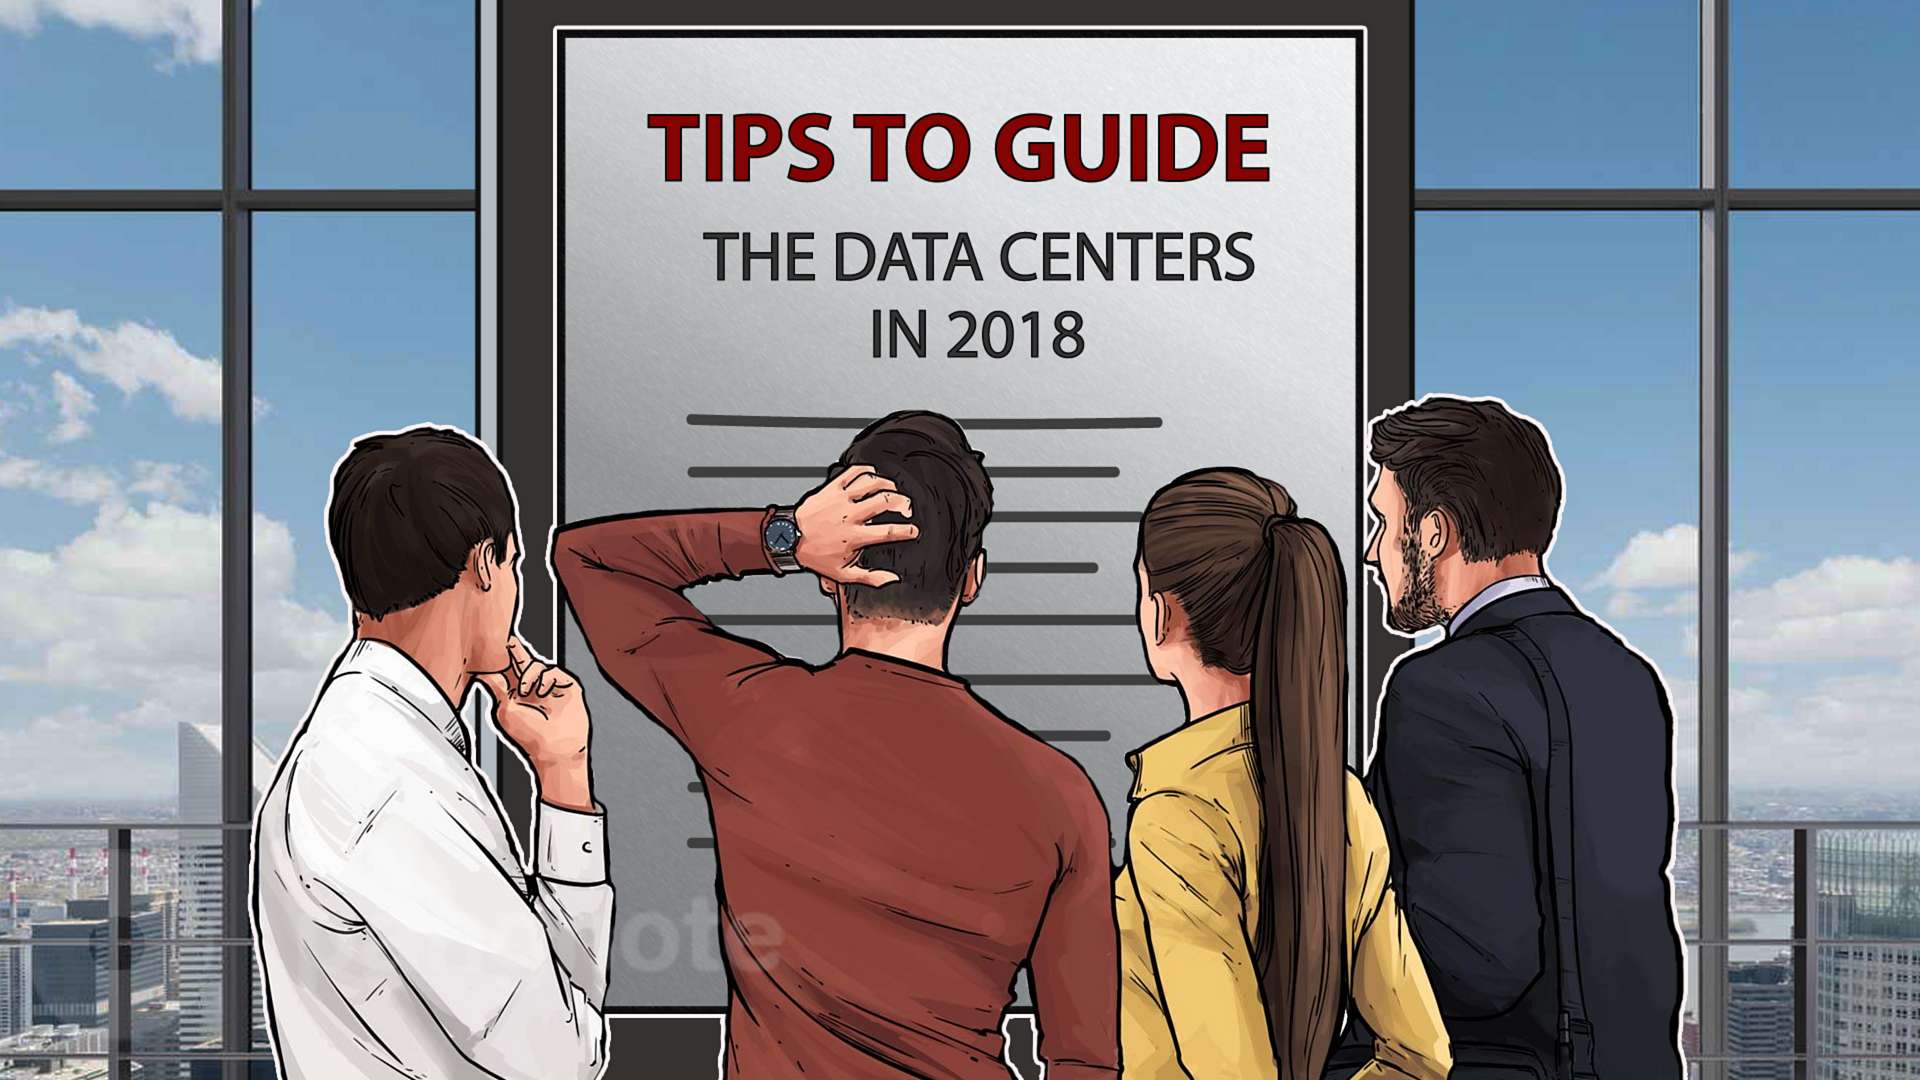 Tips to guide the data centers in 2018